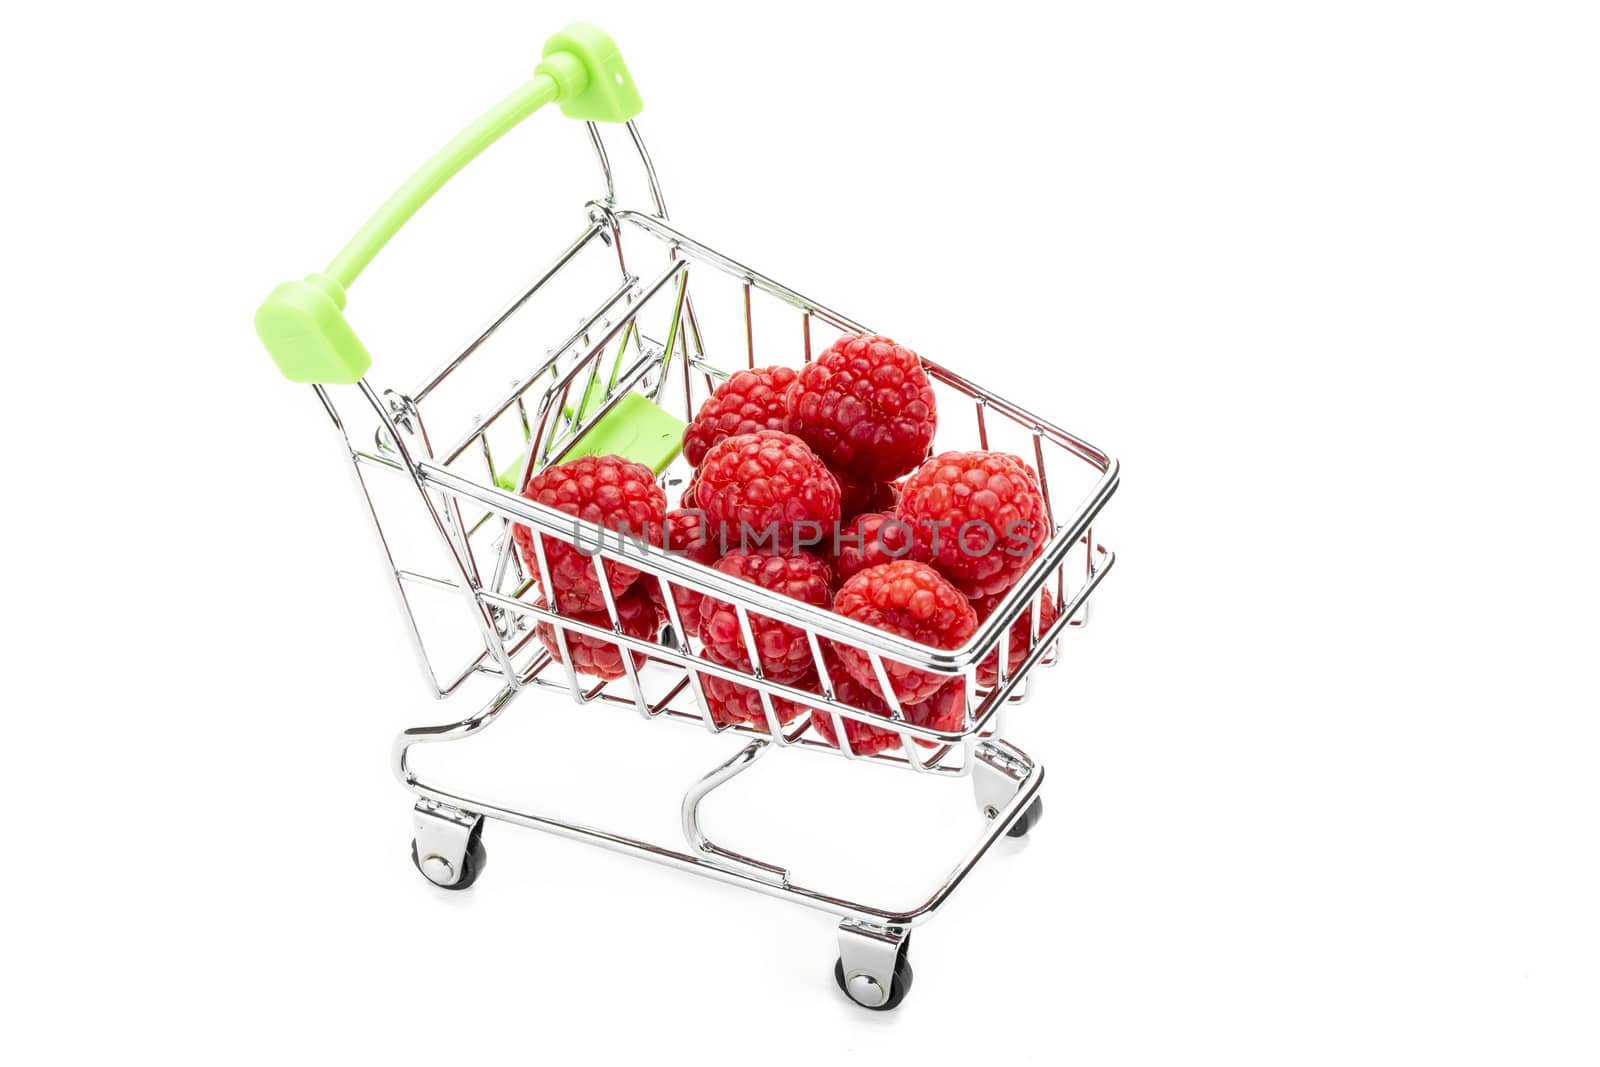 Fresh raspberries in miniature shopping cart. by Nawoot